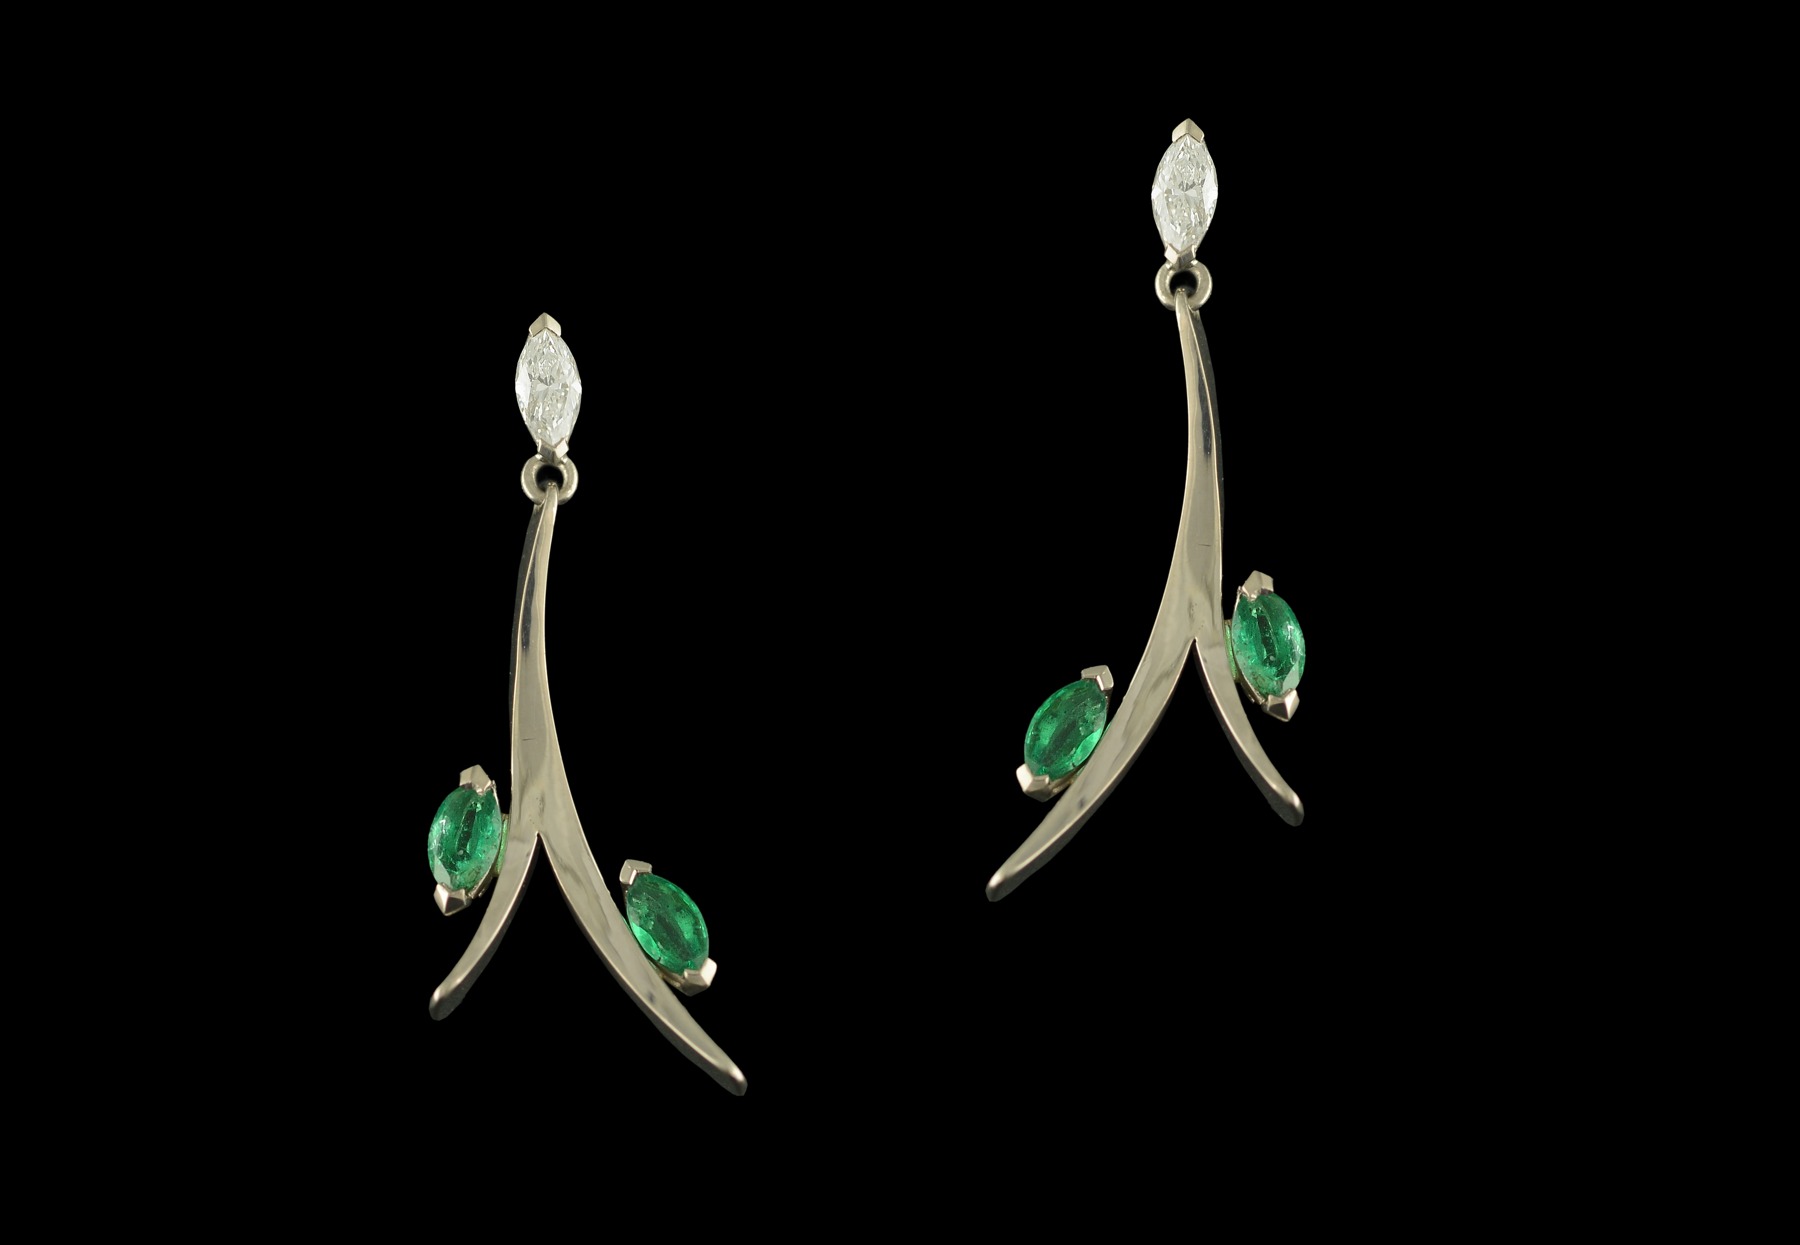 Forged white gold earrings set with marquise cut emeralds and diamonds